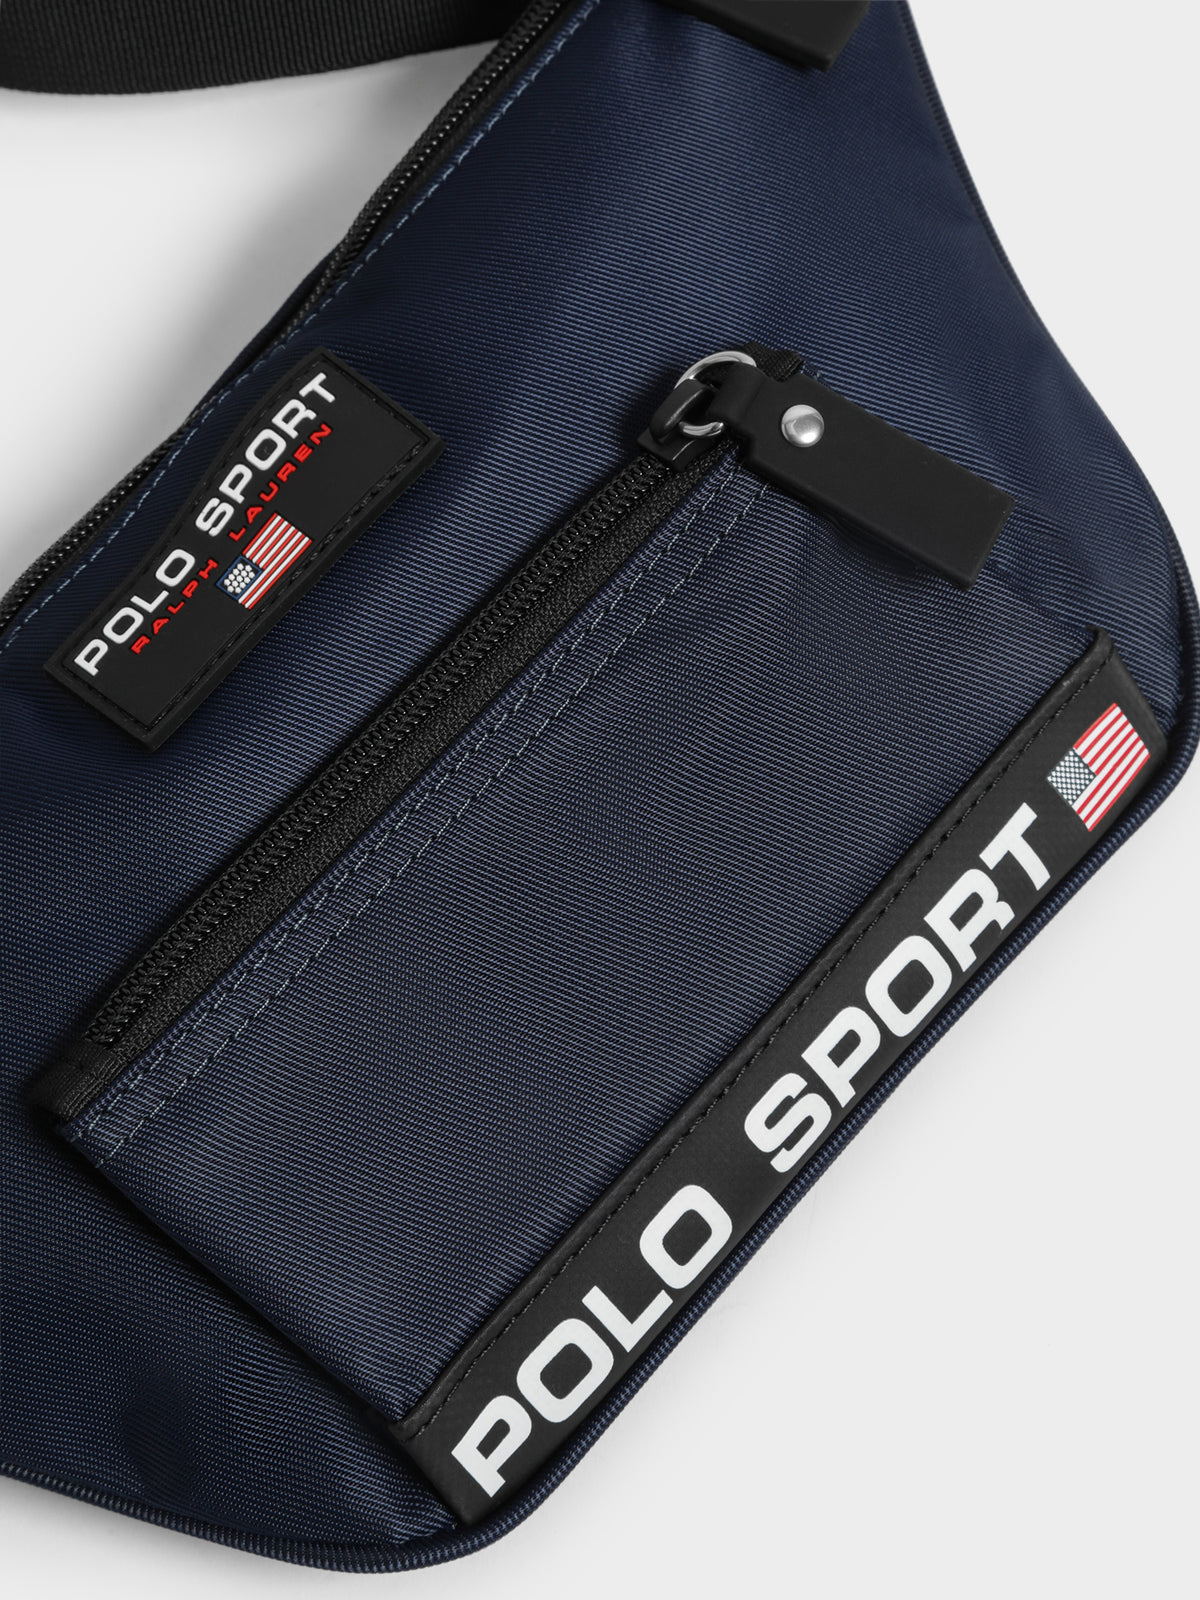 Polo Sport Waist Pack in Navy